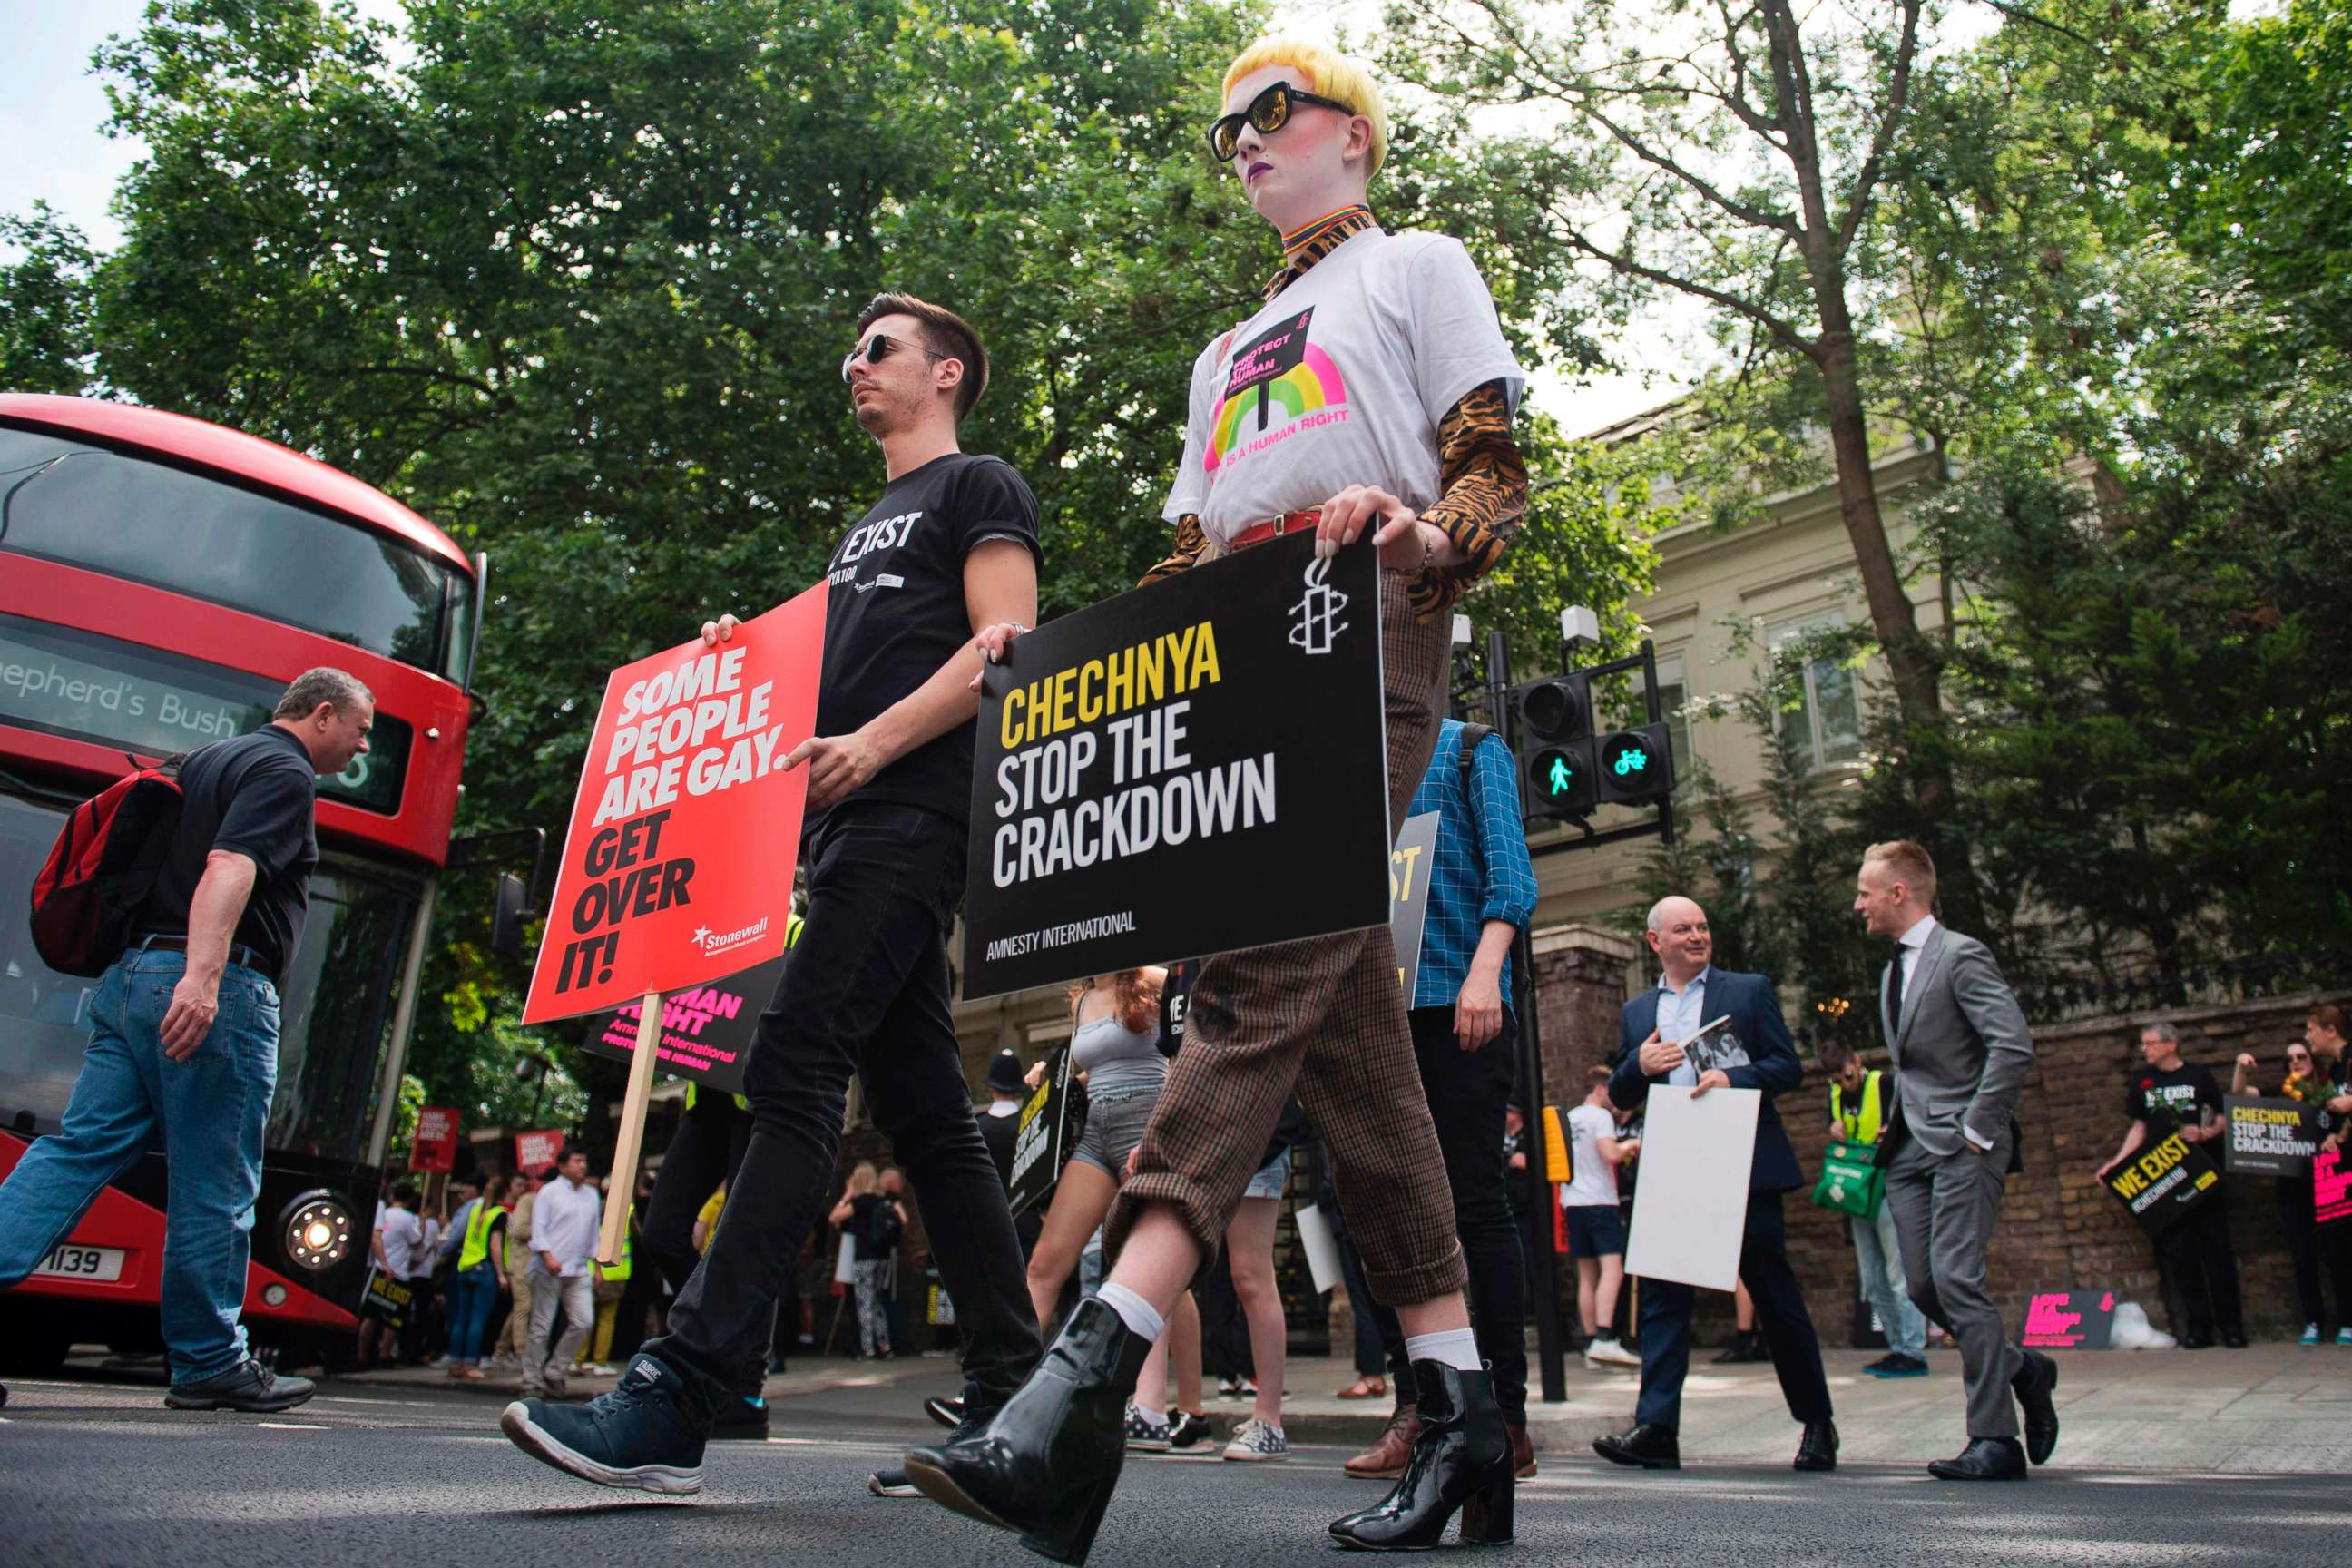 PHOTO: Demonstrators carry placards as they protest over an alleged crackdown on gay men in Chechnya outside the Russian Embassy, in London, June 2, 2017. 